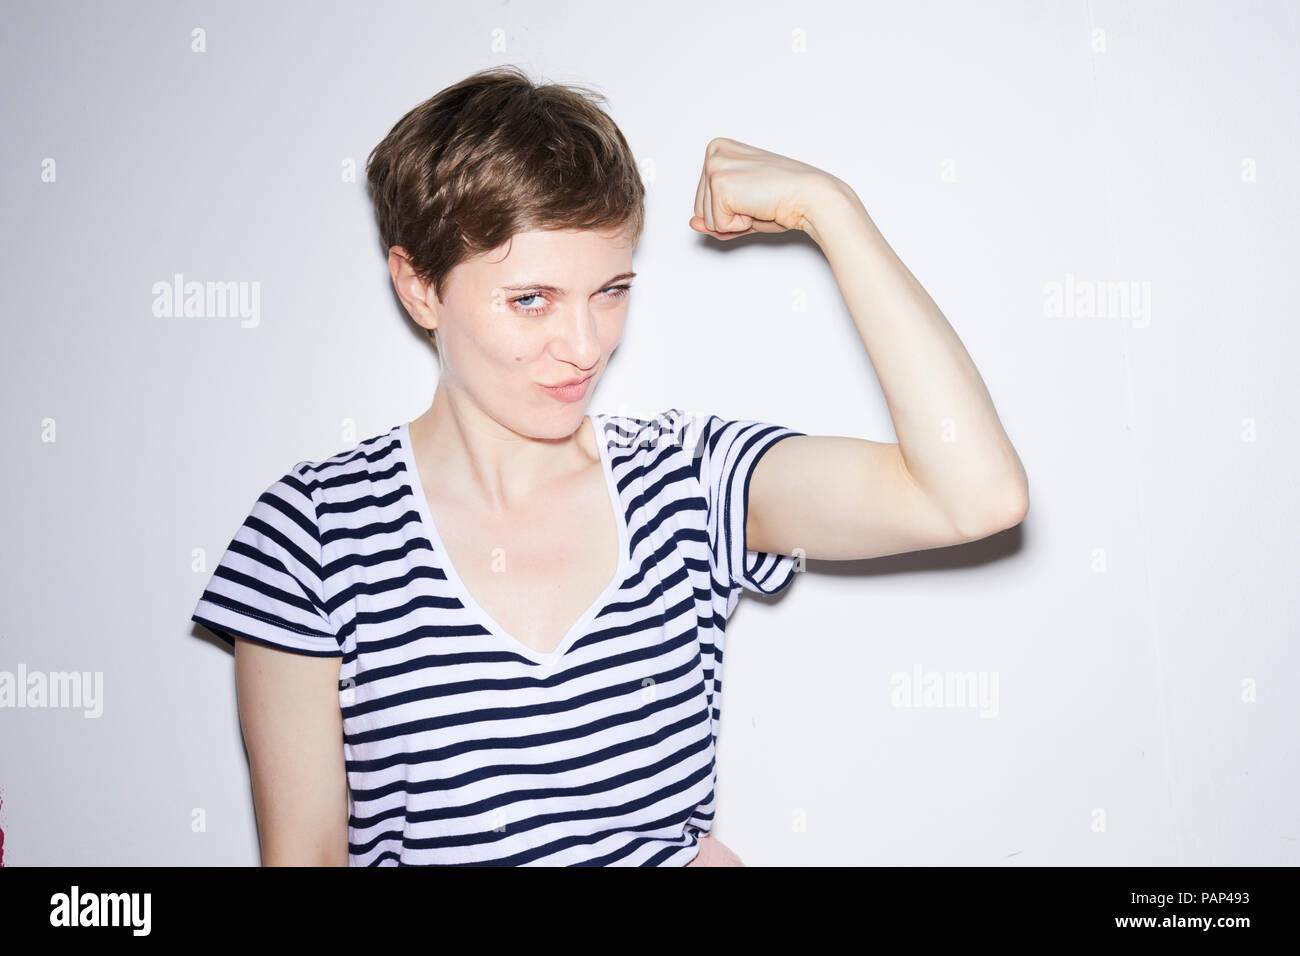 Portrait of blond woman, short hair, showing muscles Stock Photo